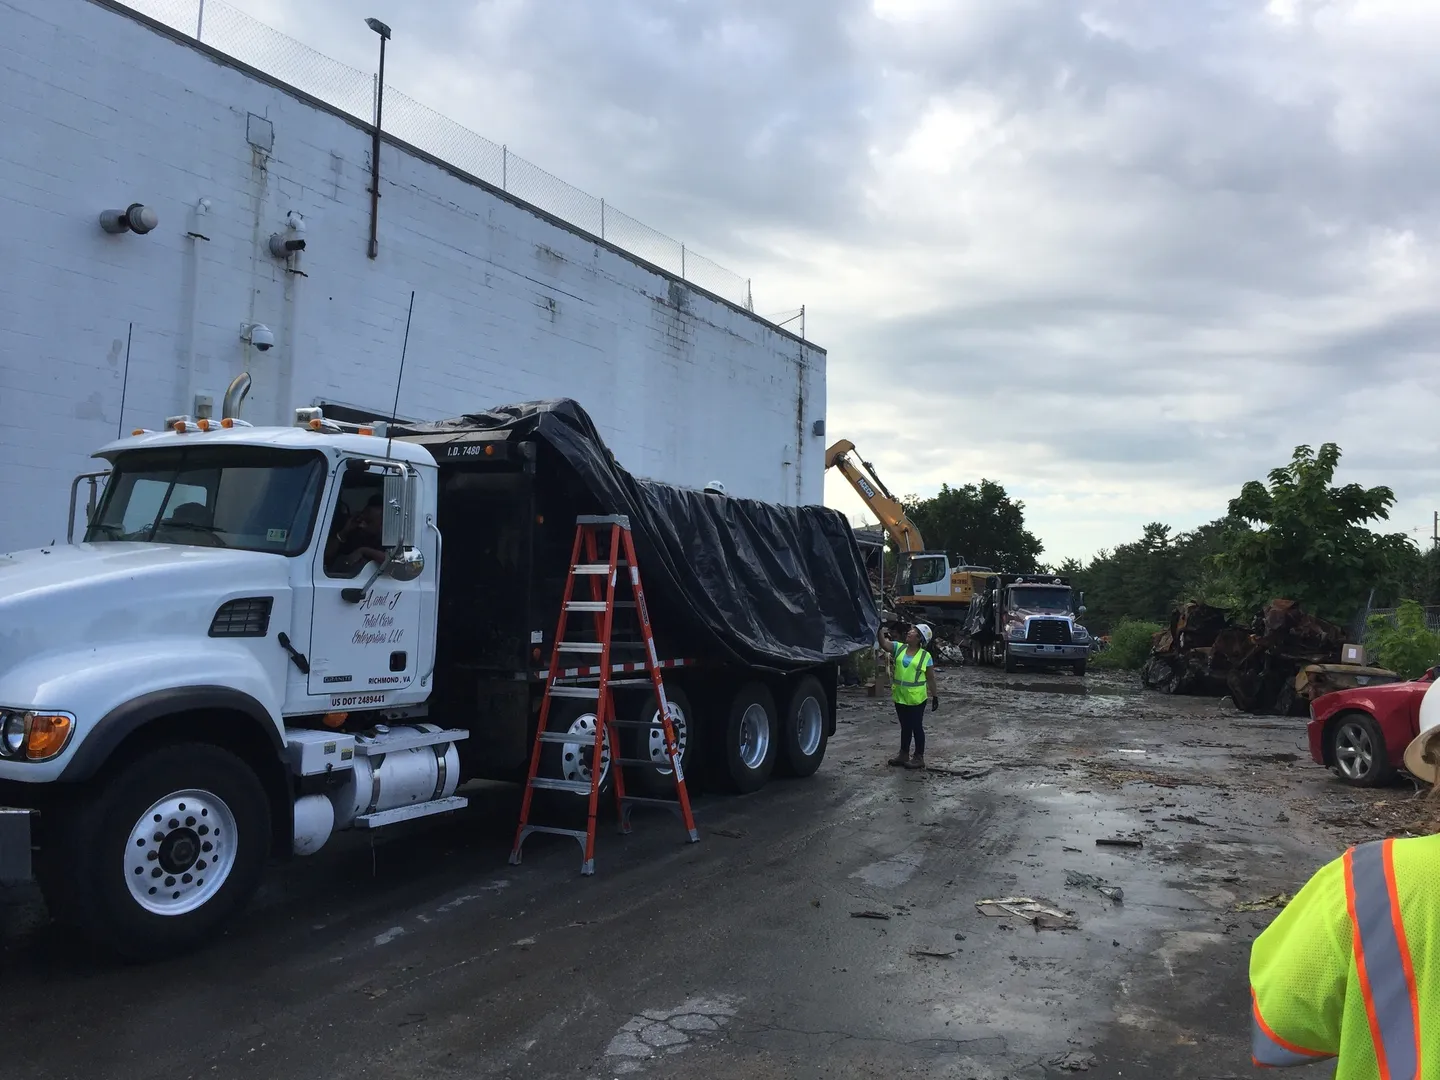 Truck and workers cleaning up debris.